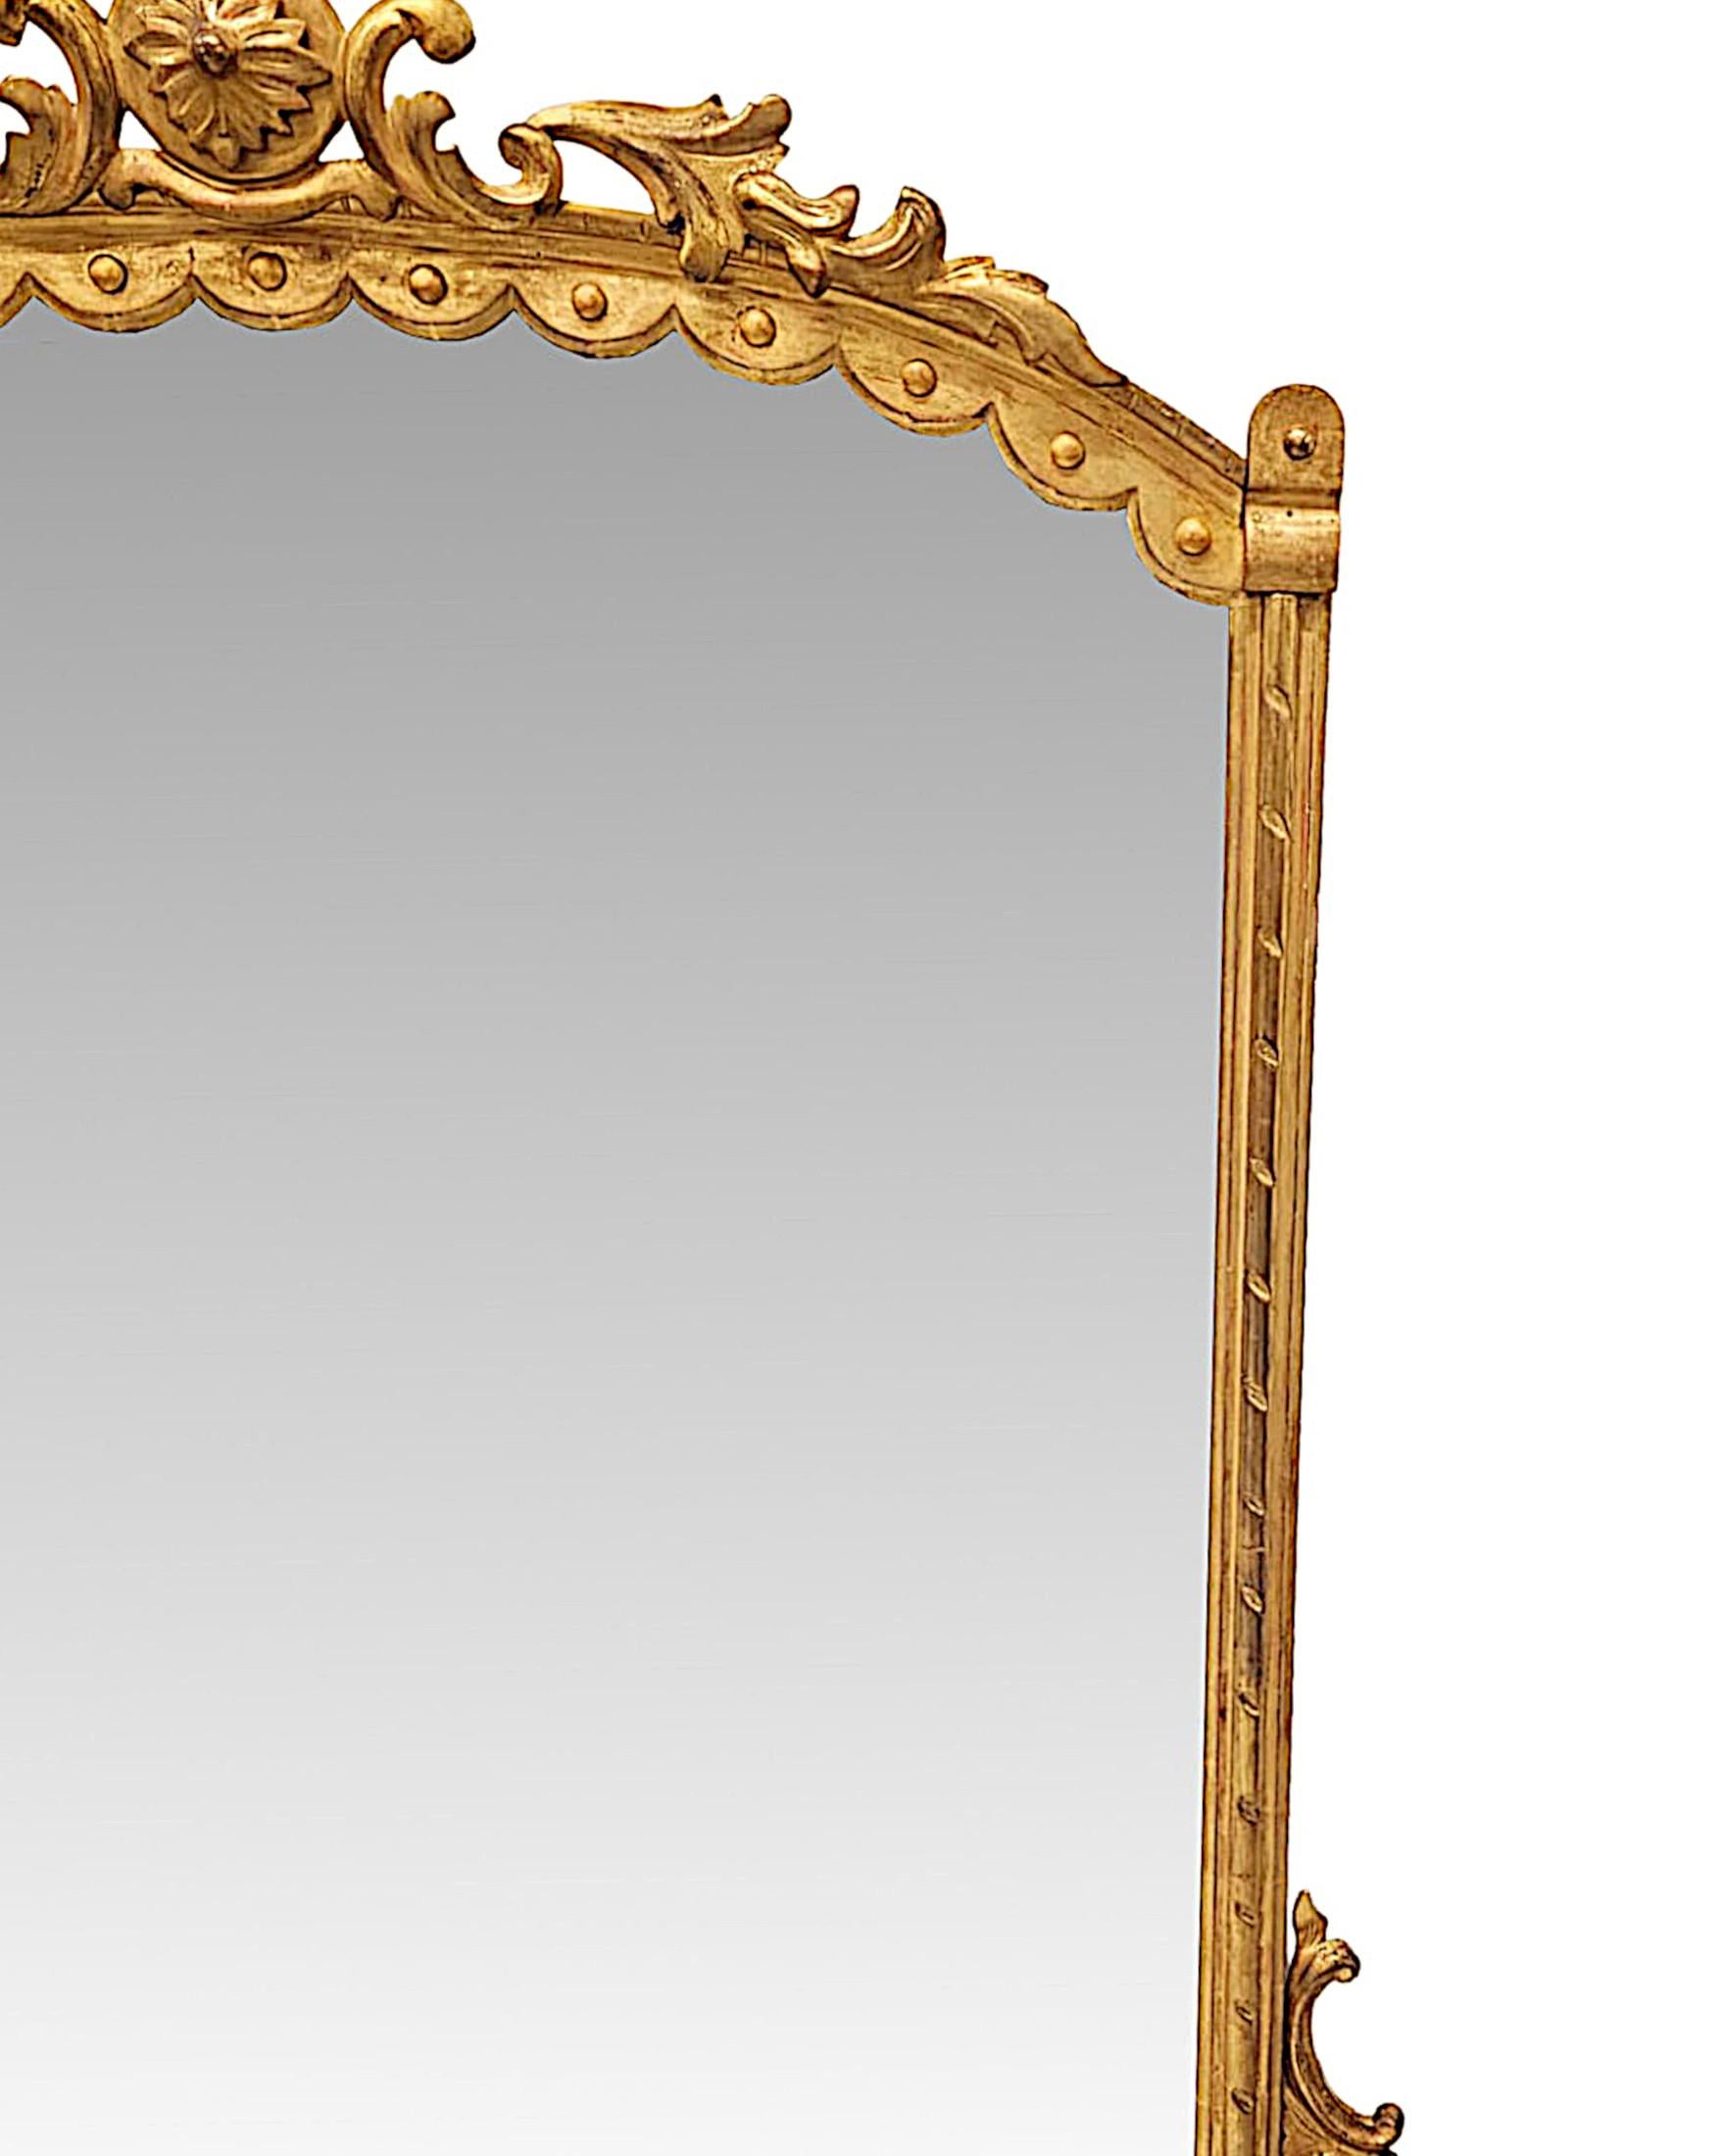 English A Fabulous 19th Century Giltwood Overmantel Mirror For Sale